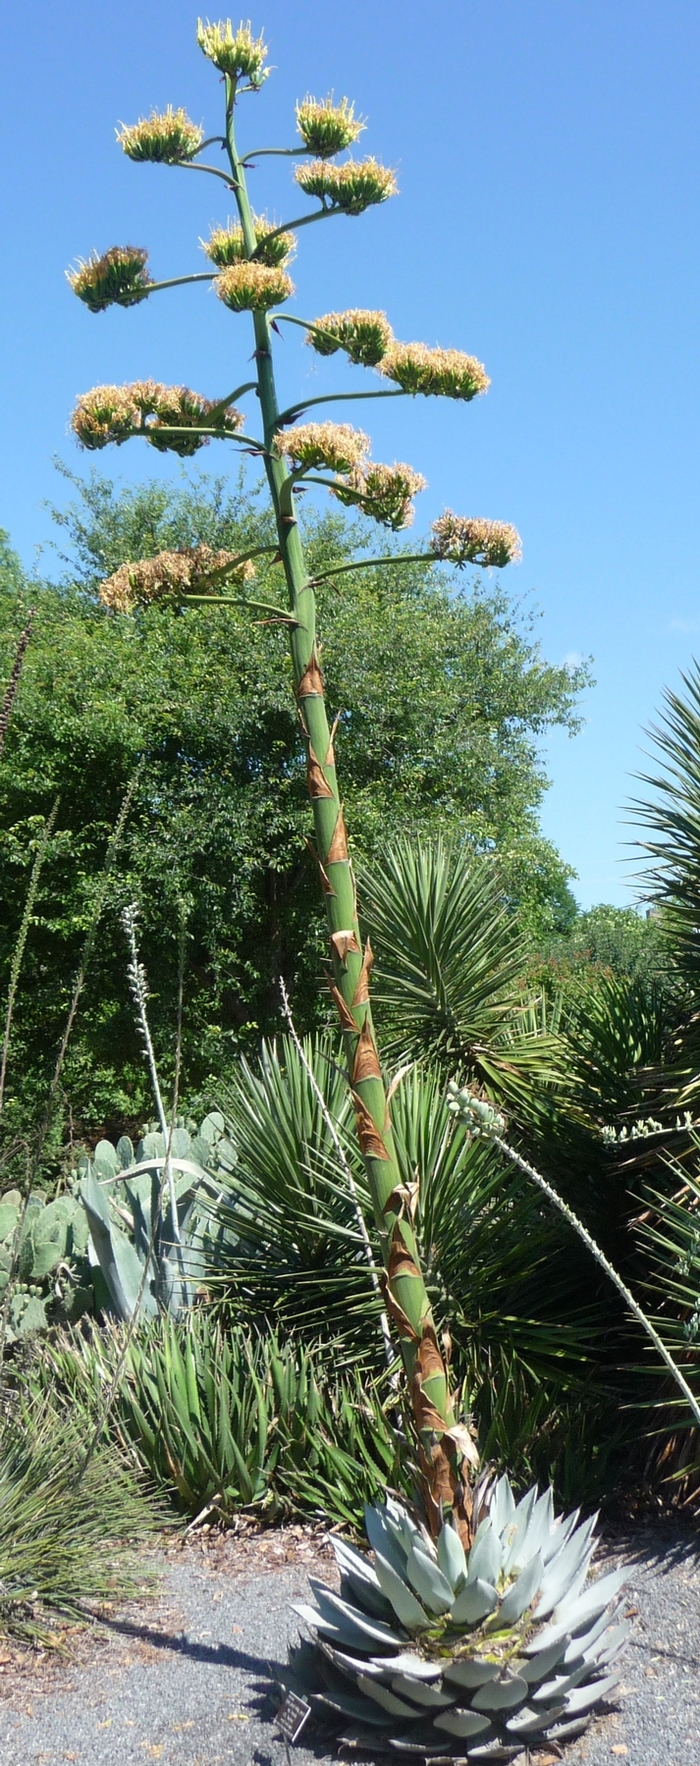 Agave parryi 'J.C. Raulston' (017266)